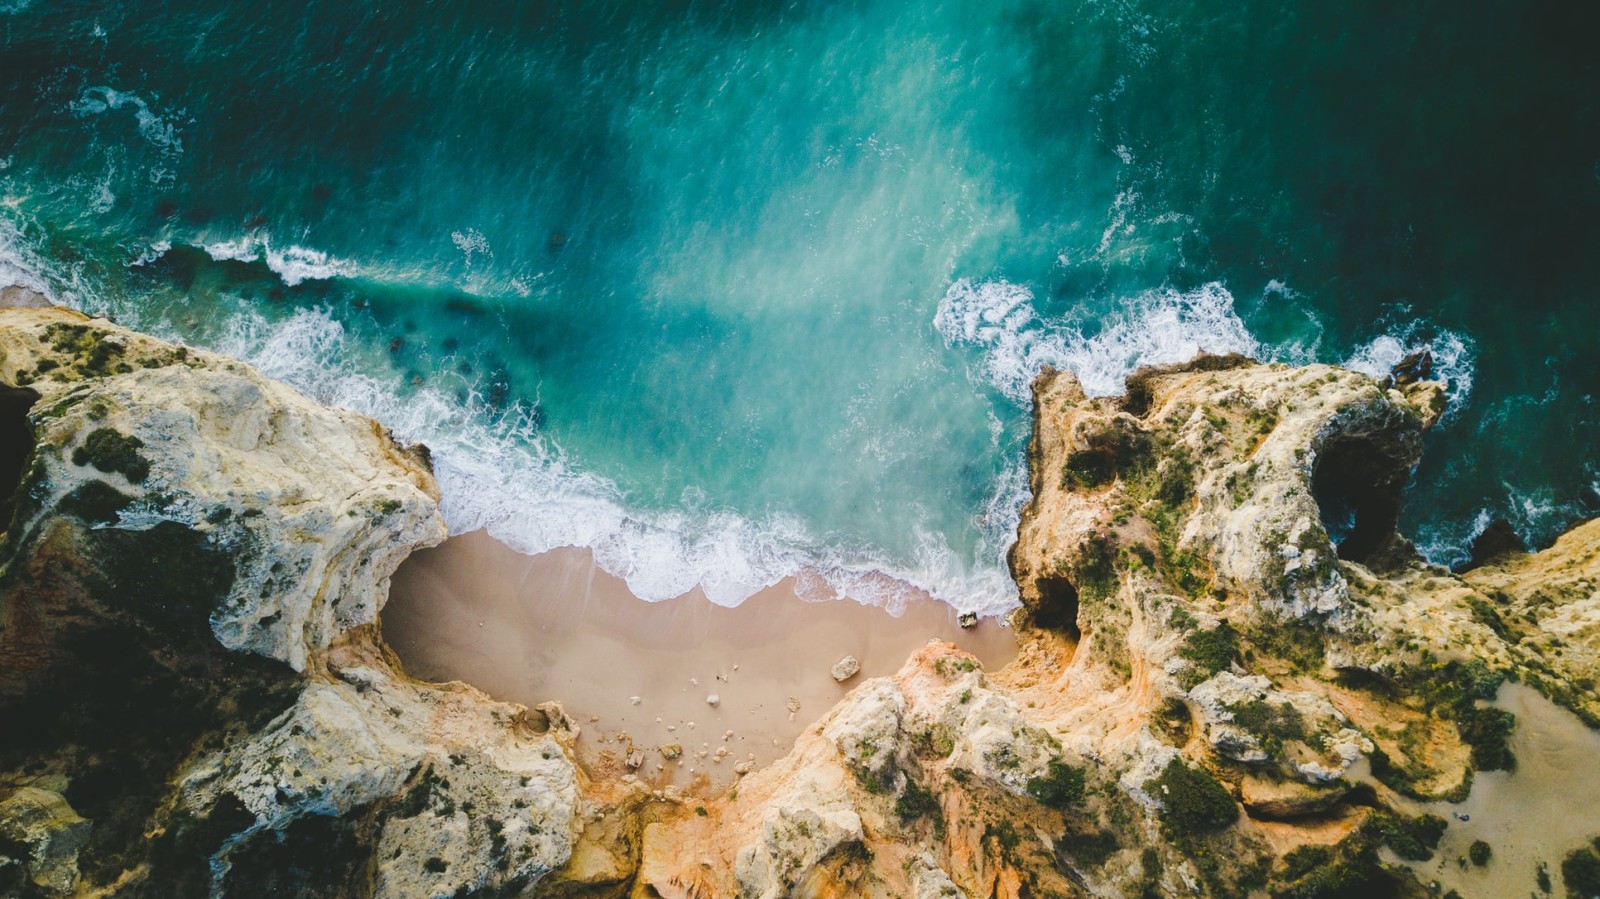 lagos Portugal aerial view of blue water with waves crashing into brown cliffs